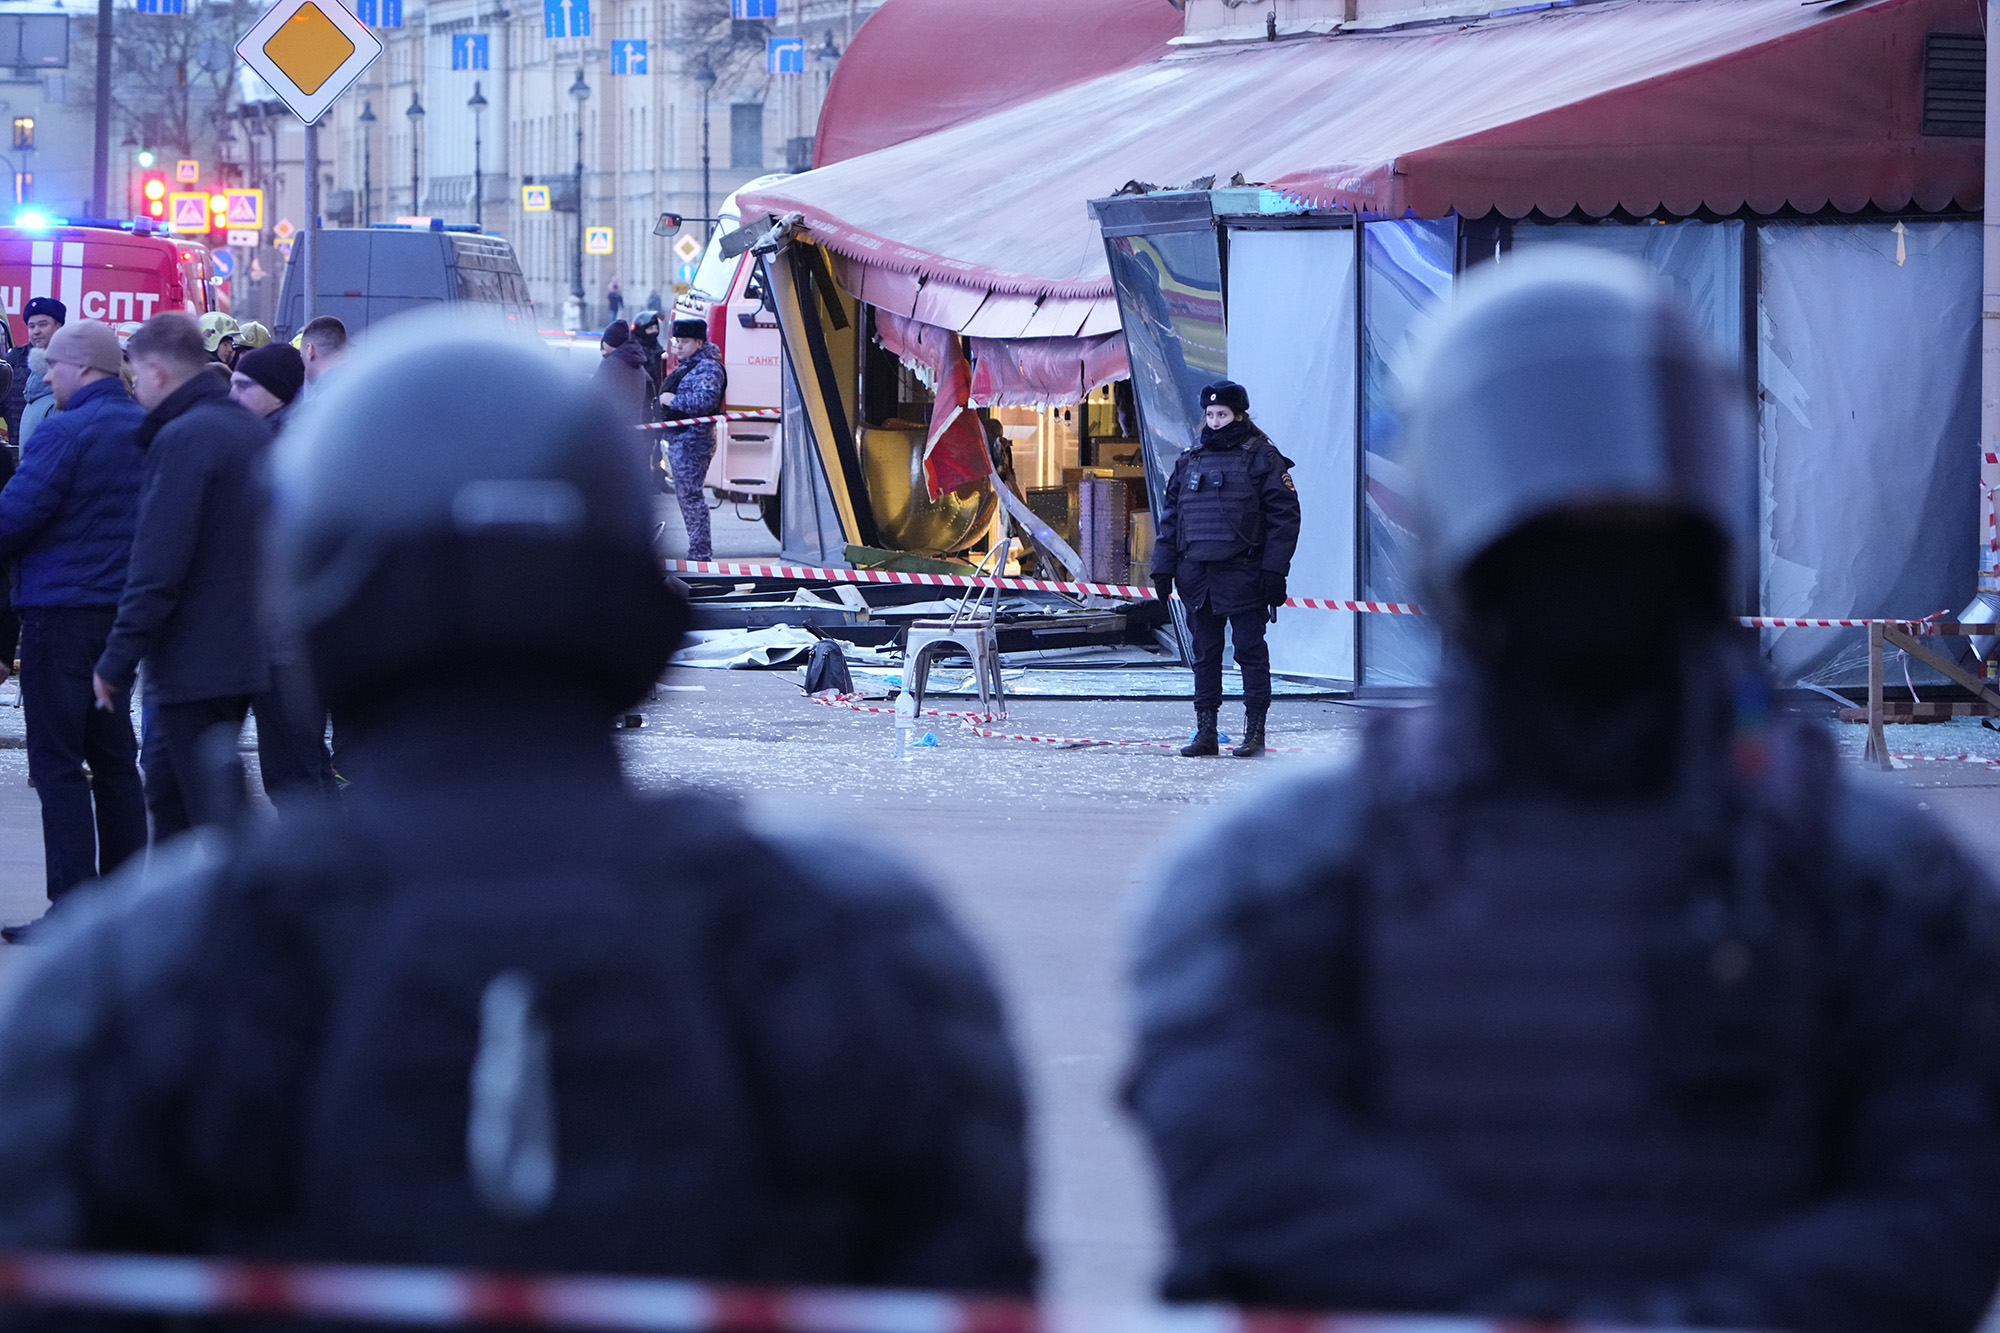 Russian police officers are seen at the site of an explosion at a cafe in St. Petersburg, Russia, on April 2.